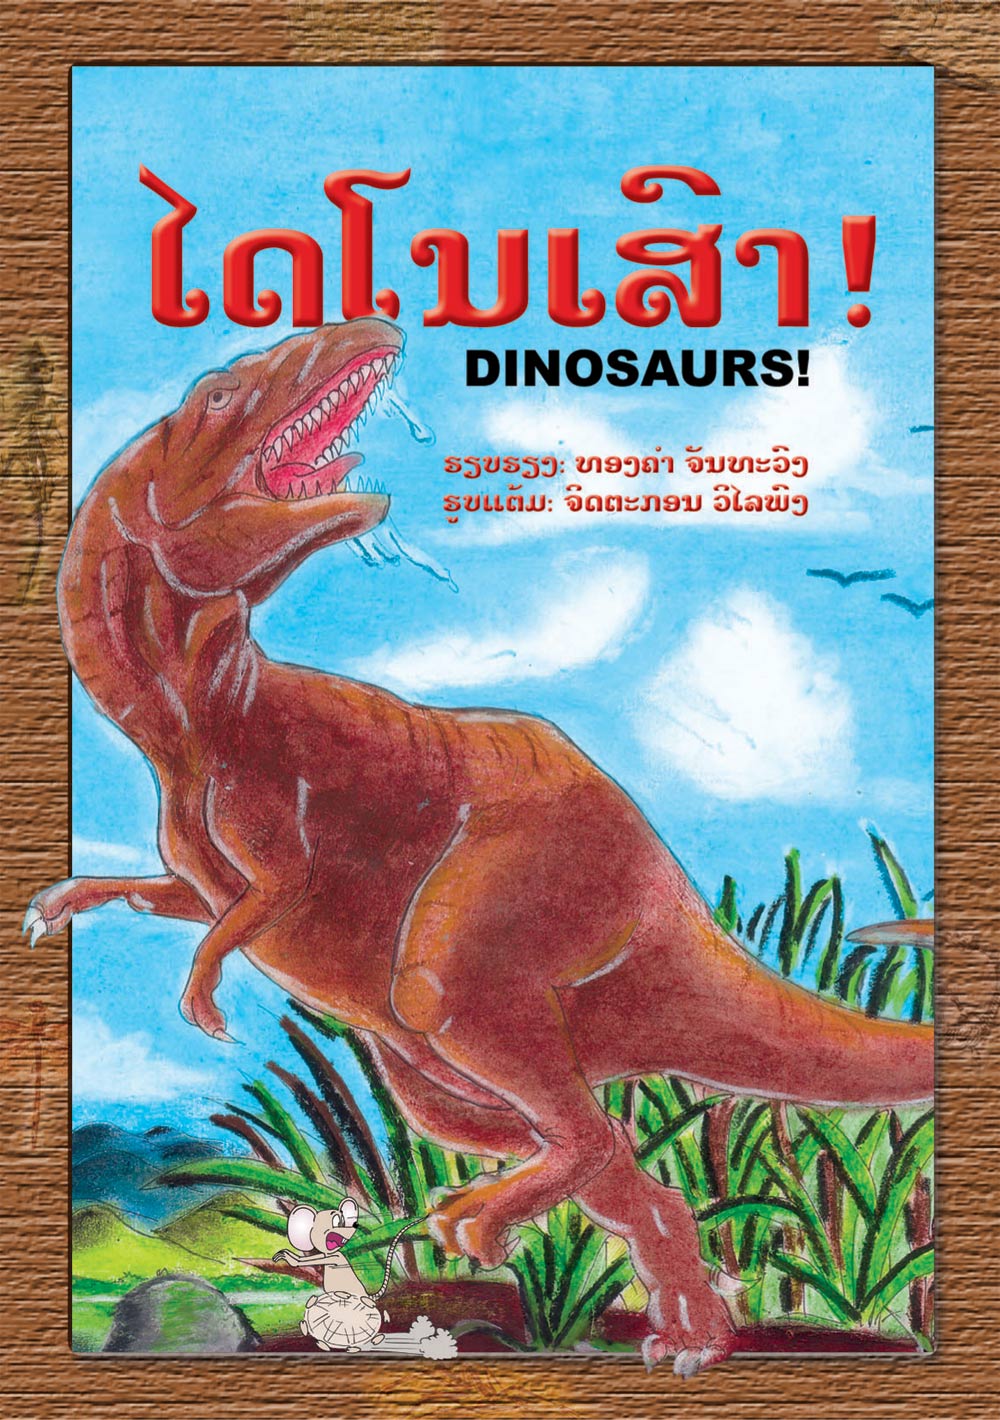 Dinosaurs! large book cover, published in Lao and English